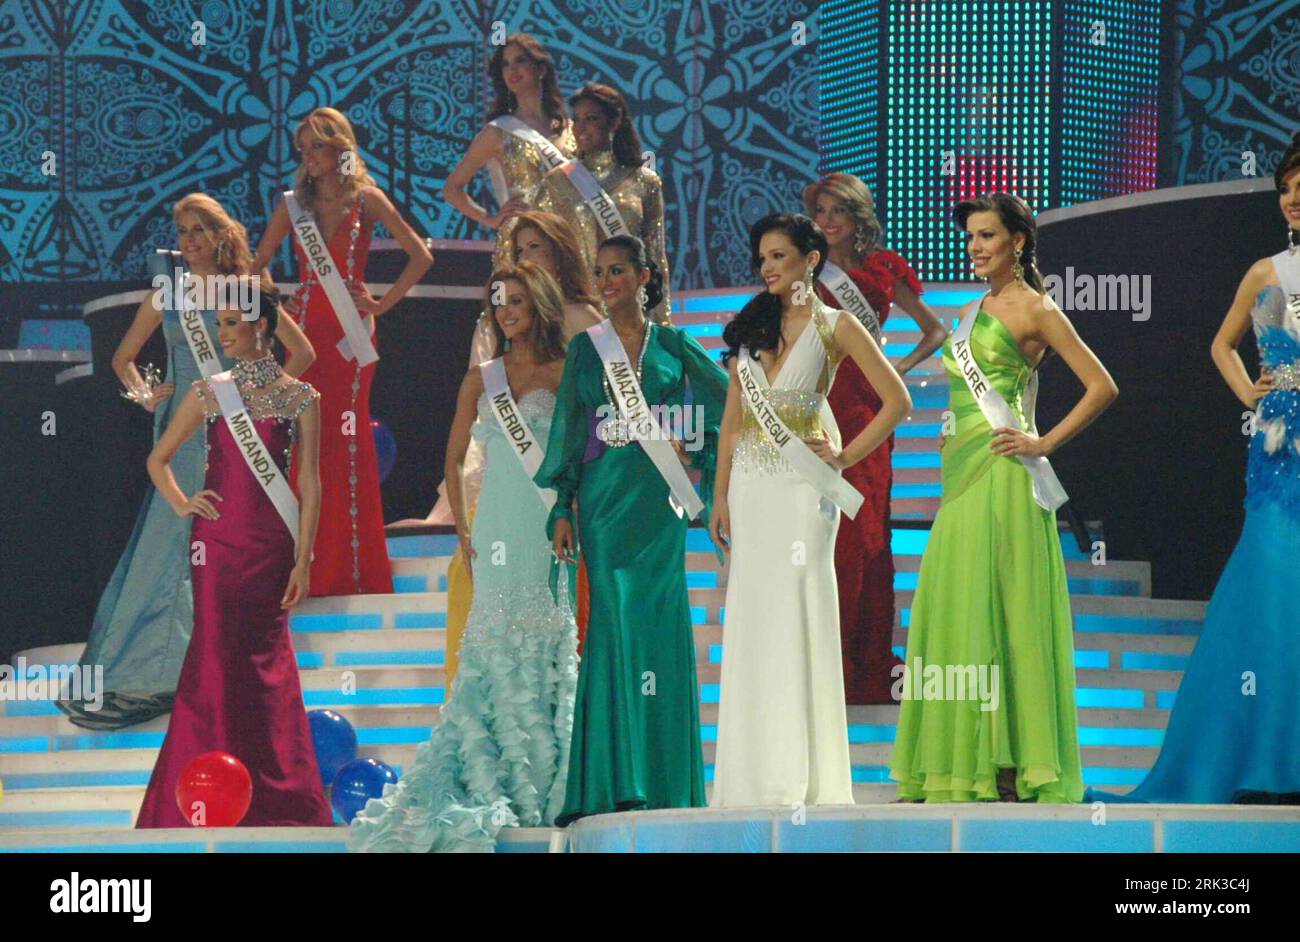 Bildnummer: 53429969  Datum: 24.09.2009  Copyright: imago/Xinhua (090924) -- CARACAS, Sept. 24, 2009 (Xinhua) -- Beauties compete in the evening gown competition of the Miss Venezuela 2009 beauty pageant in Caracas, capital of Venezuela, Sept. 24, 2009. Marelisa Gibson, aged 21 and a college student, won the beauty pageant and will compete for Miss Universe title next year representing Venezuela. (Xinhua/Juan Carlos Hernandez) (zcq) (6)VENEZUELA-CARACAS-MISS VENEZUELA PUBLICATIONxNOTxINxCHN Misswahl Miss Wahl Kbdig xdp 2009 quer o00 Schönheitswettbewerb    Bildnummer 53429969 Date 24 09 2009 C Stock Photo